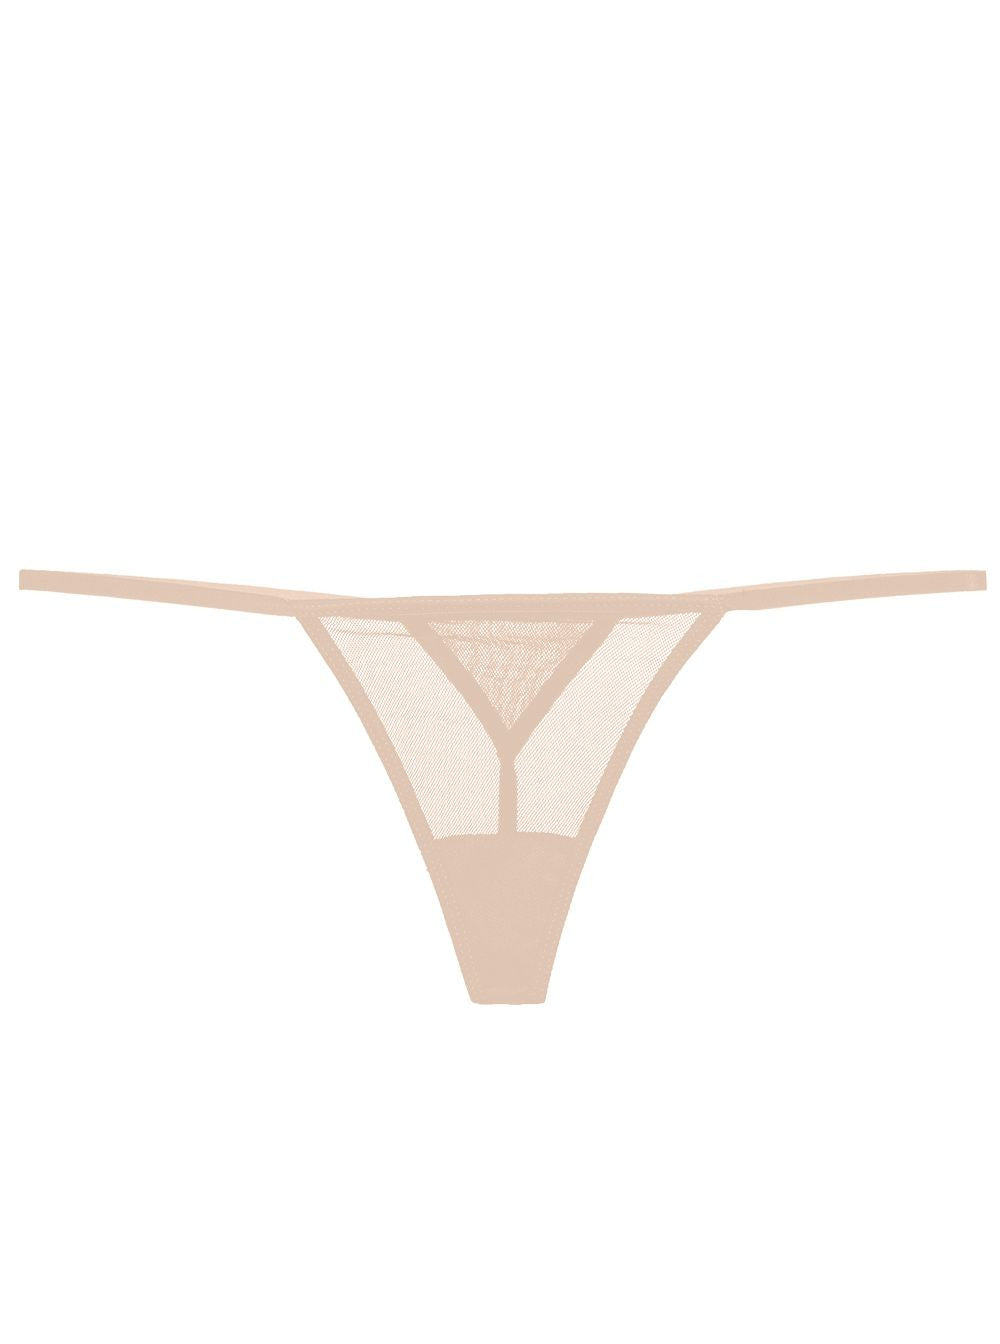 Cosabella New Soire Sheer G-String #SOIRC0221 - In the Mood Intimates